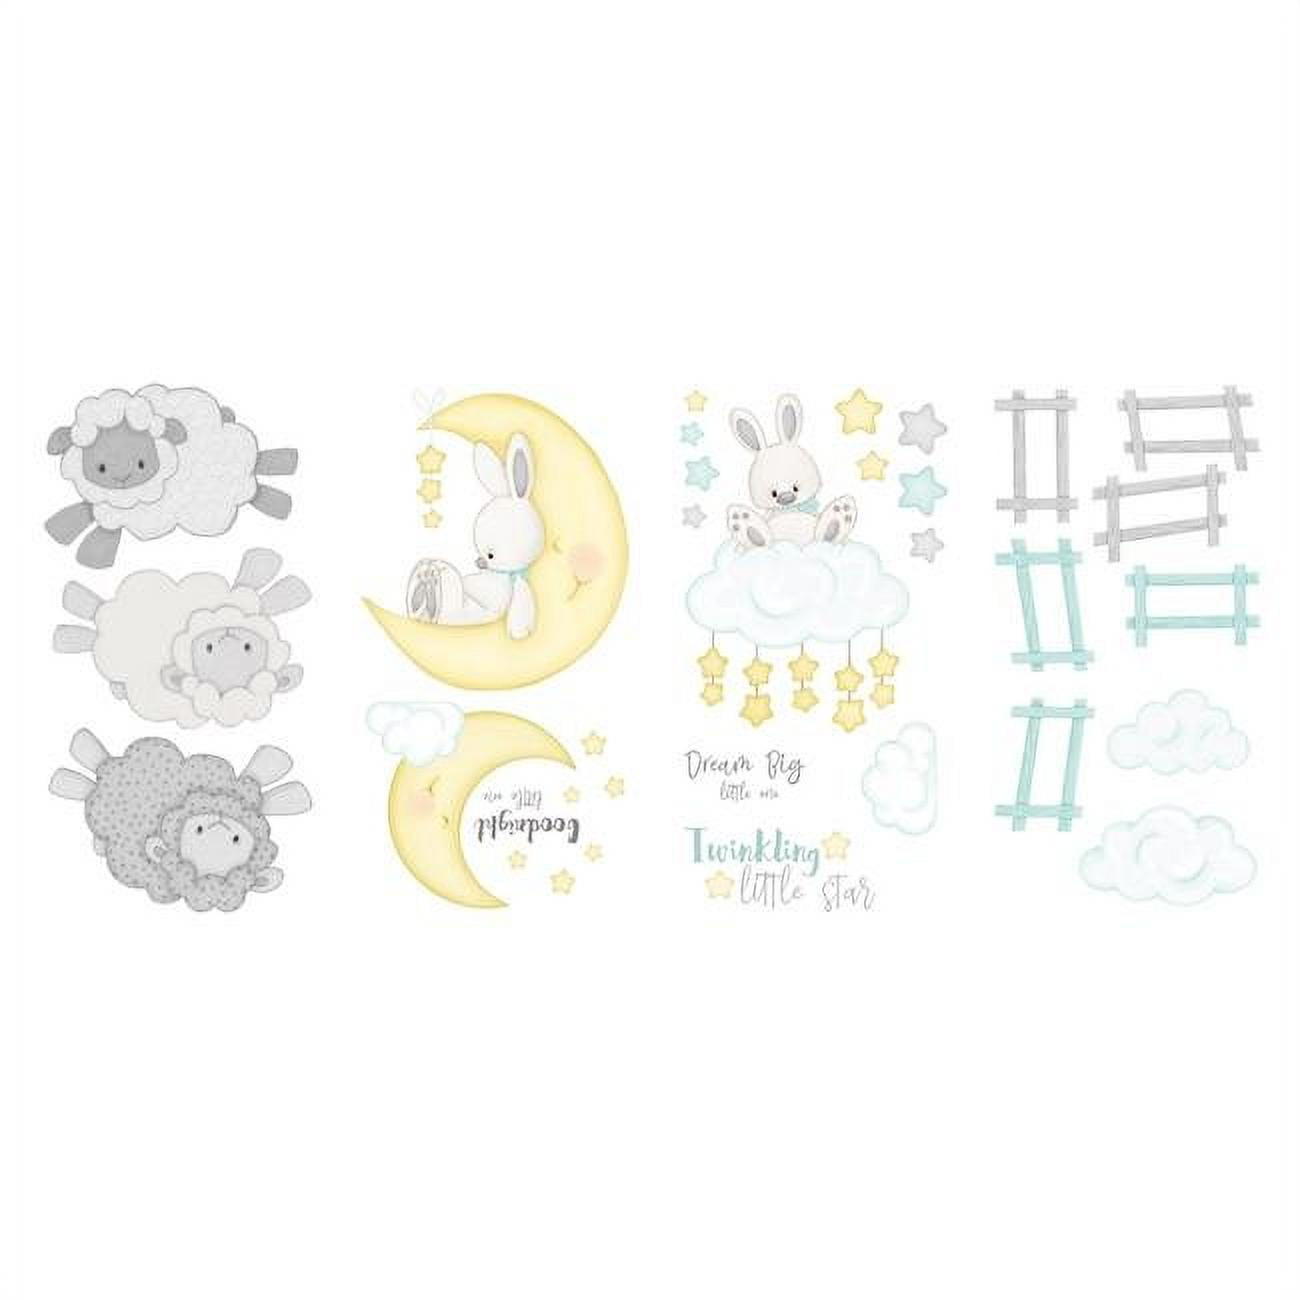 10023 Sweet Dreams Applique Wall Decal Stickers, Super Jumbo